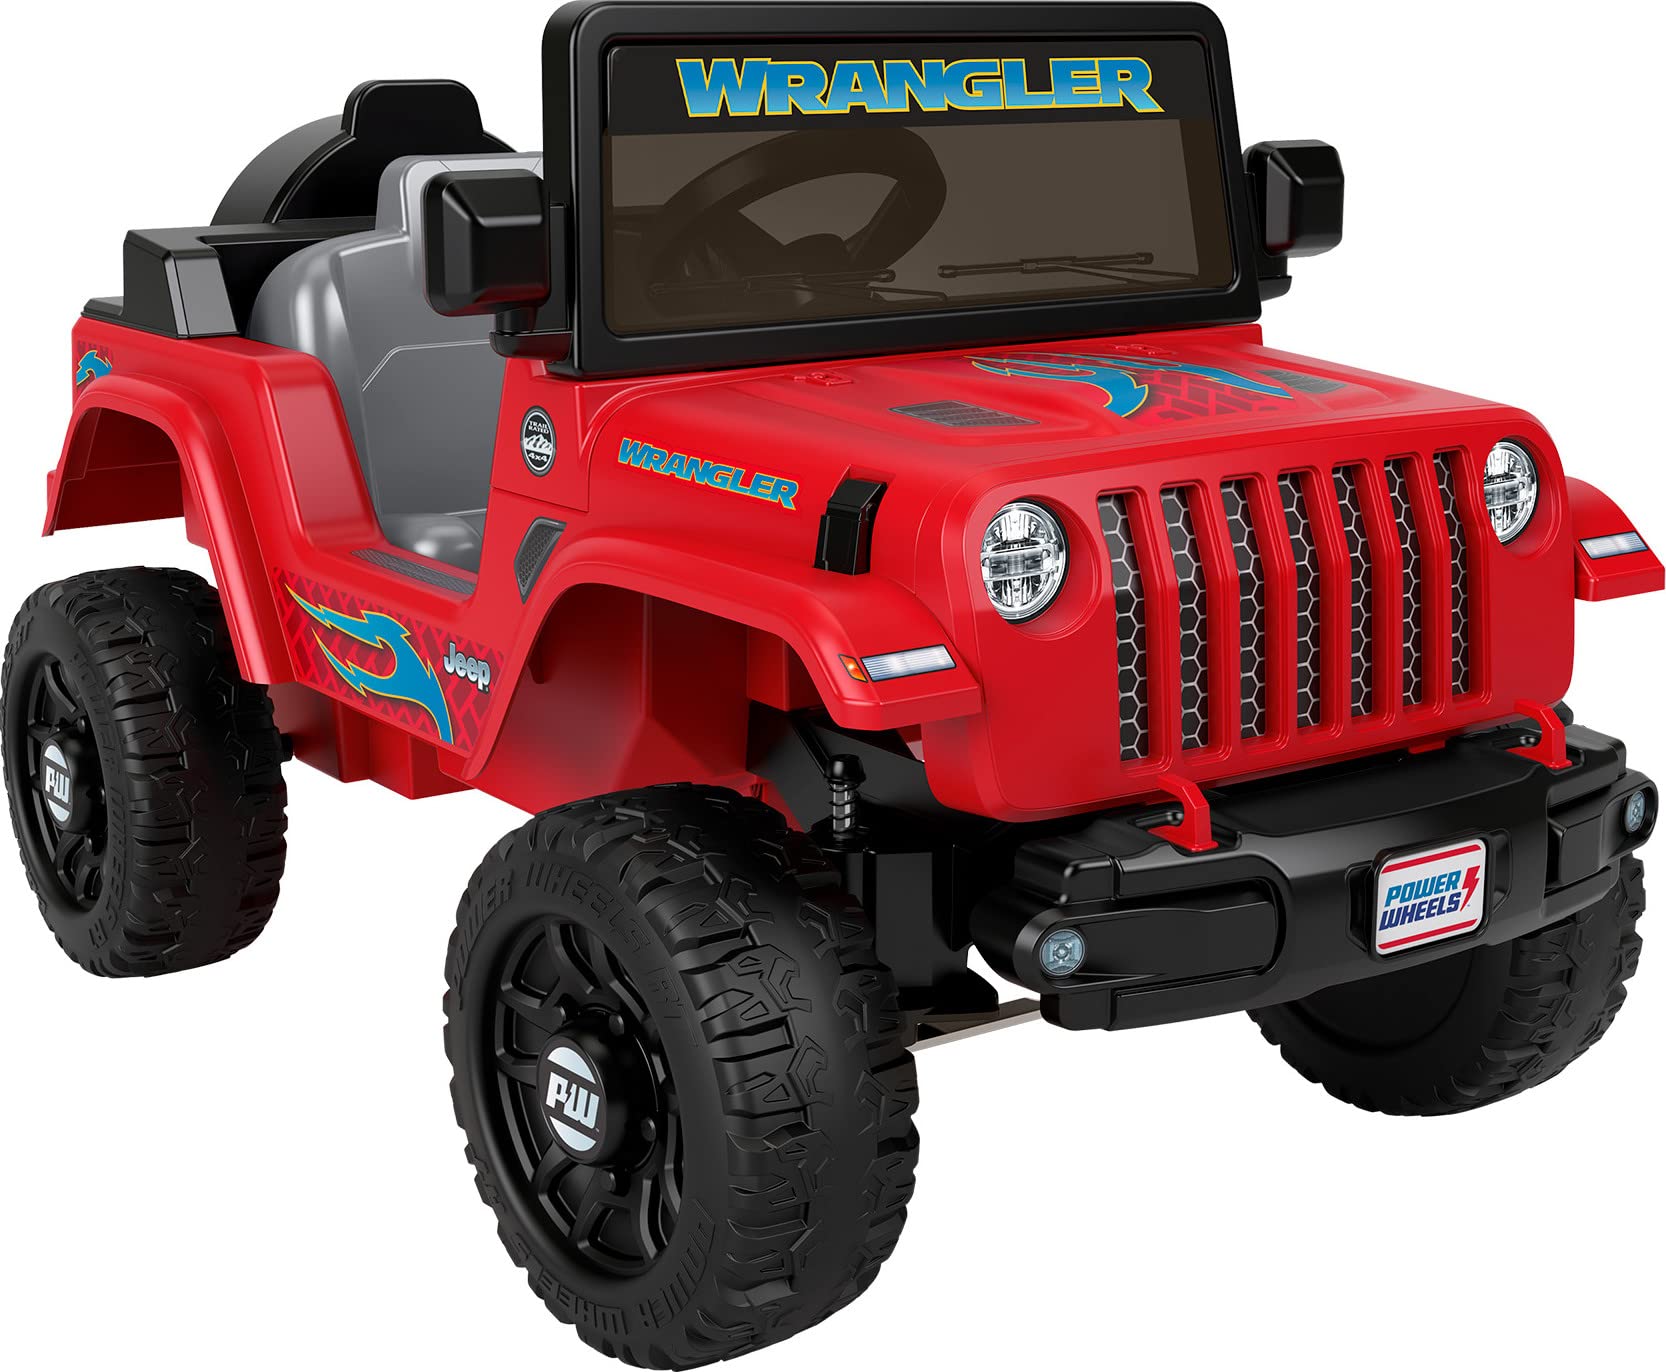 Amazon Lightning Deal: 6-Volts Red Power Wheels Jeep Wrangler Toddler Ride-On Toy $88.50 + Free Shipping